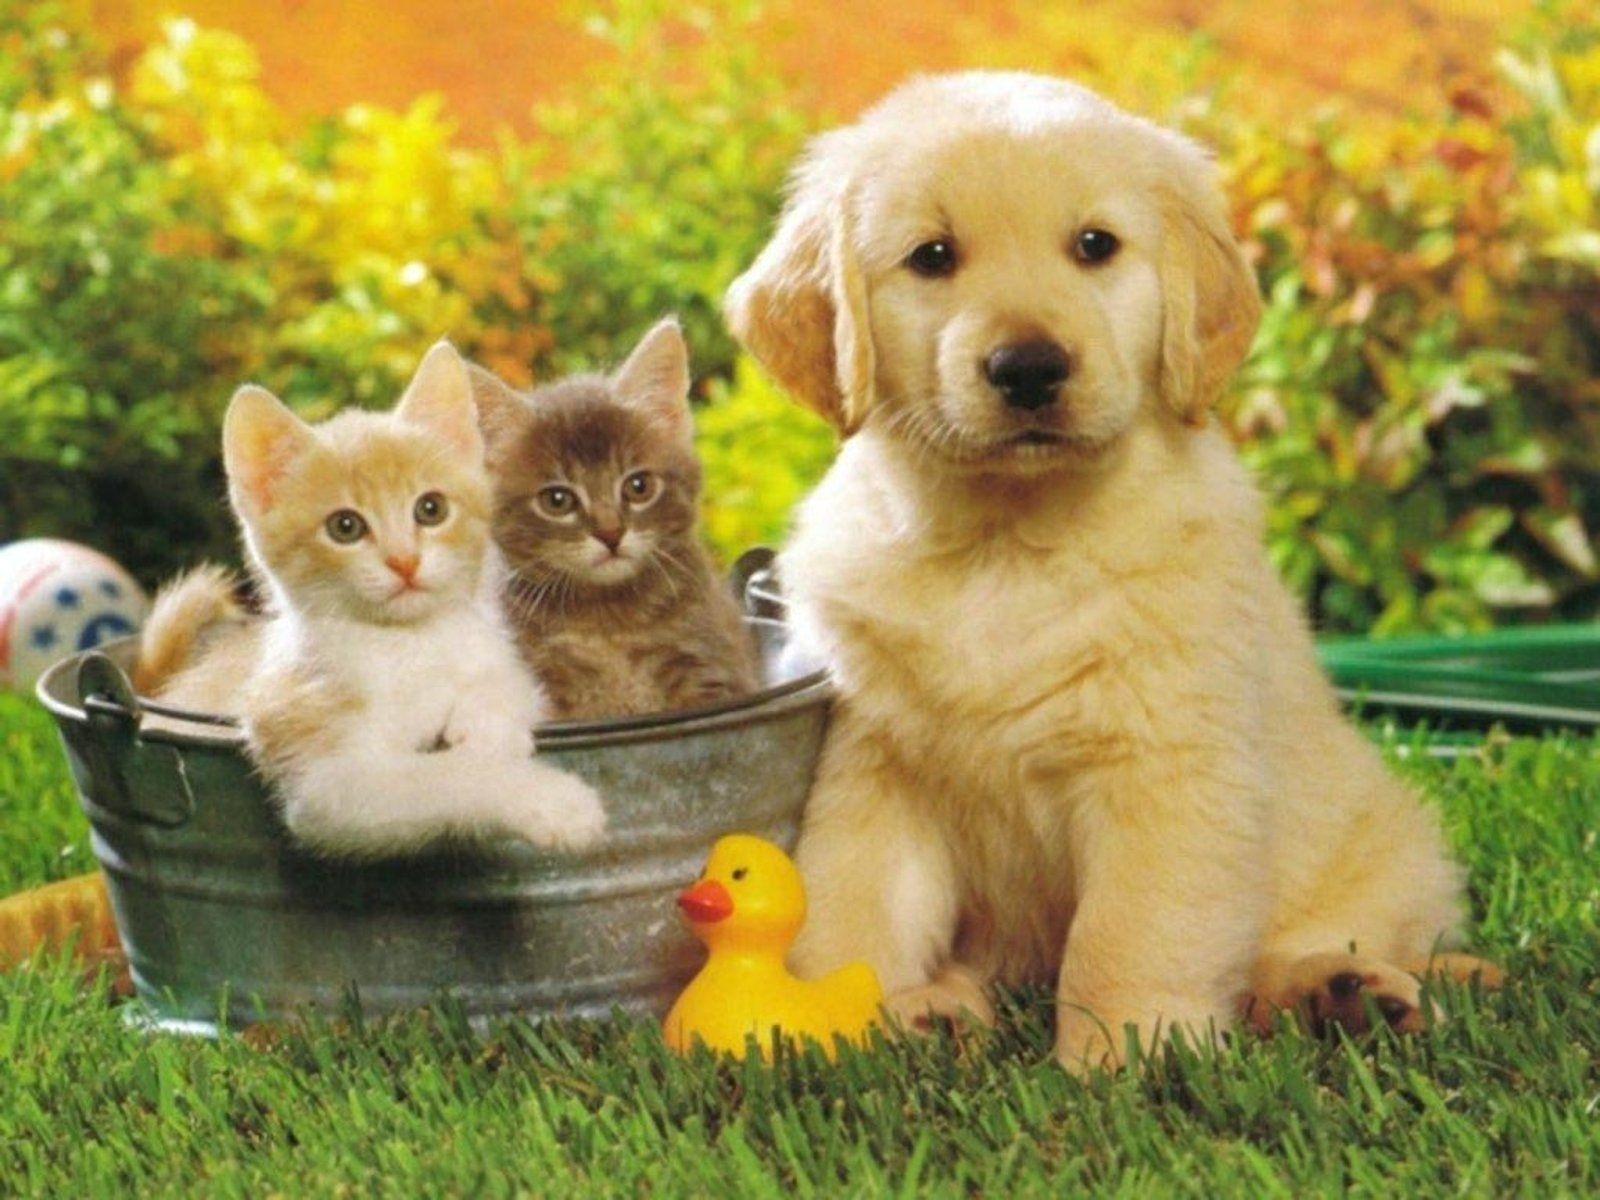 10 Top Puppies And Kittens Backgrounds FULL HD 1920×1080 For PC Background